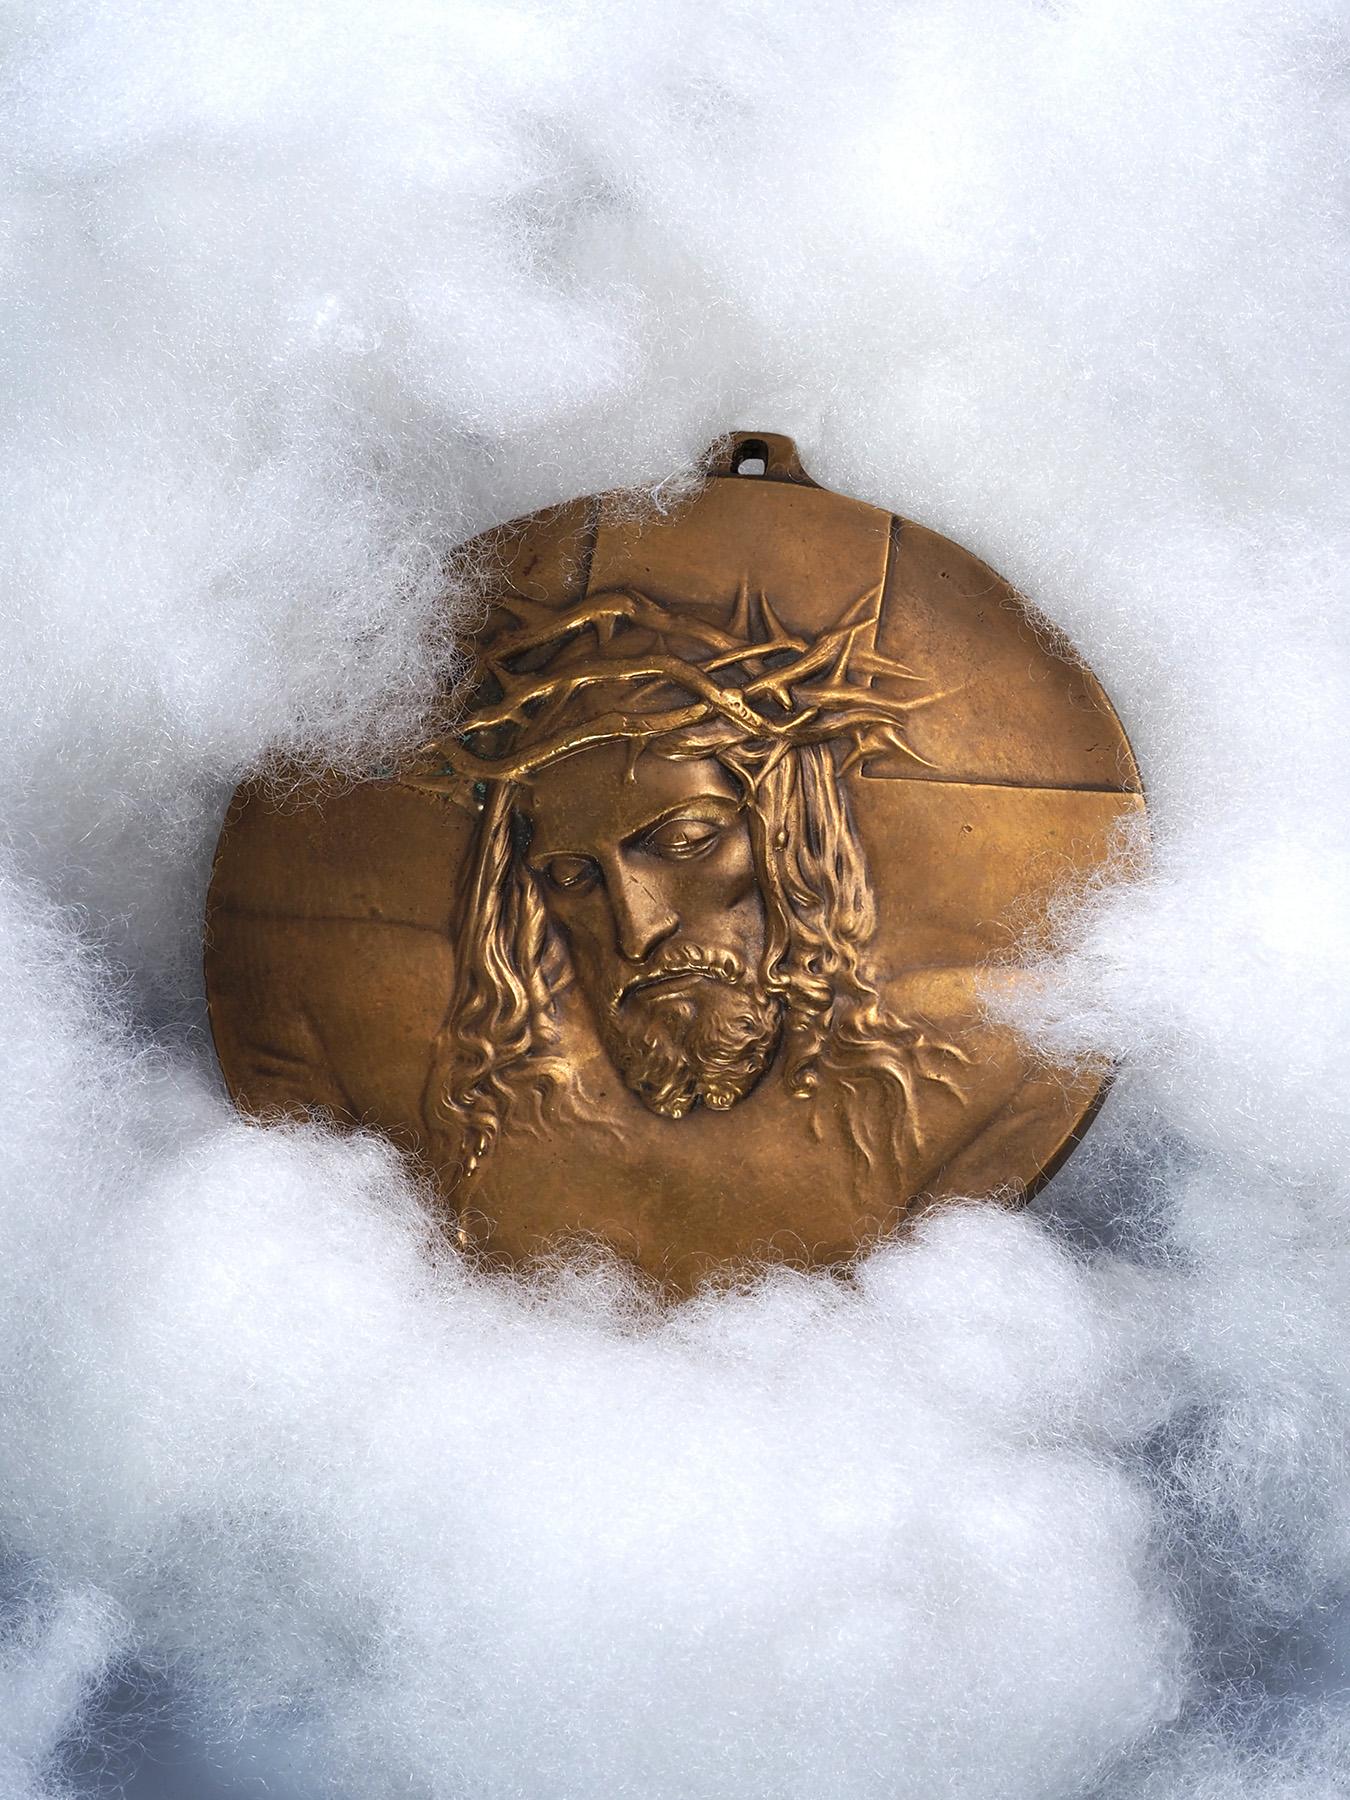 Antique Bronze Jesus Portrait Medallion Plaque by Henri Miault, French Catholic and Christian Gifts

An antique bronze medallion with a portrait of Jesus by the French sculptor Henri Miault (1881-1960). The plaque has been cast from solid bronze and